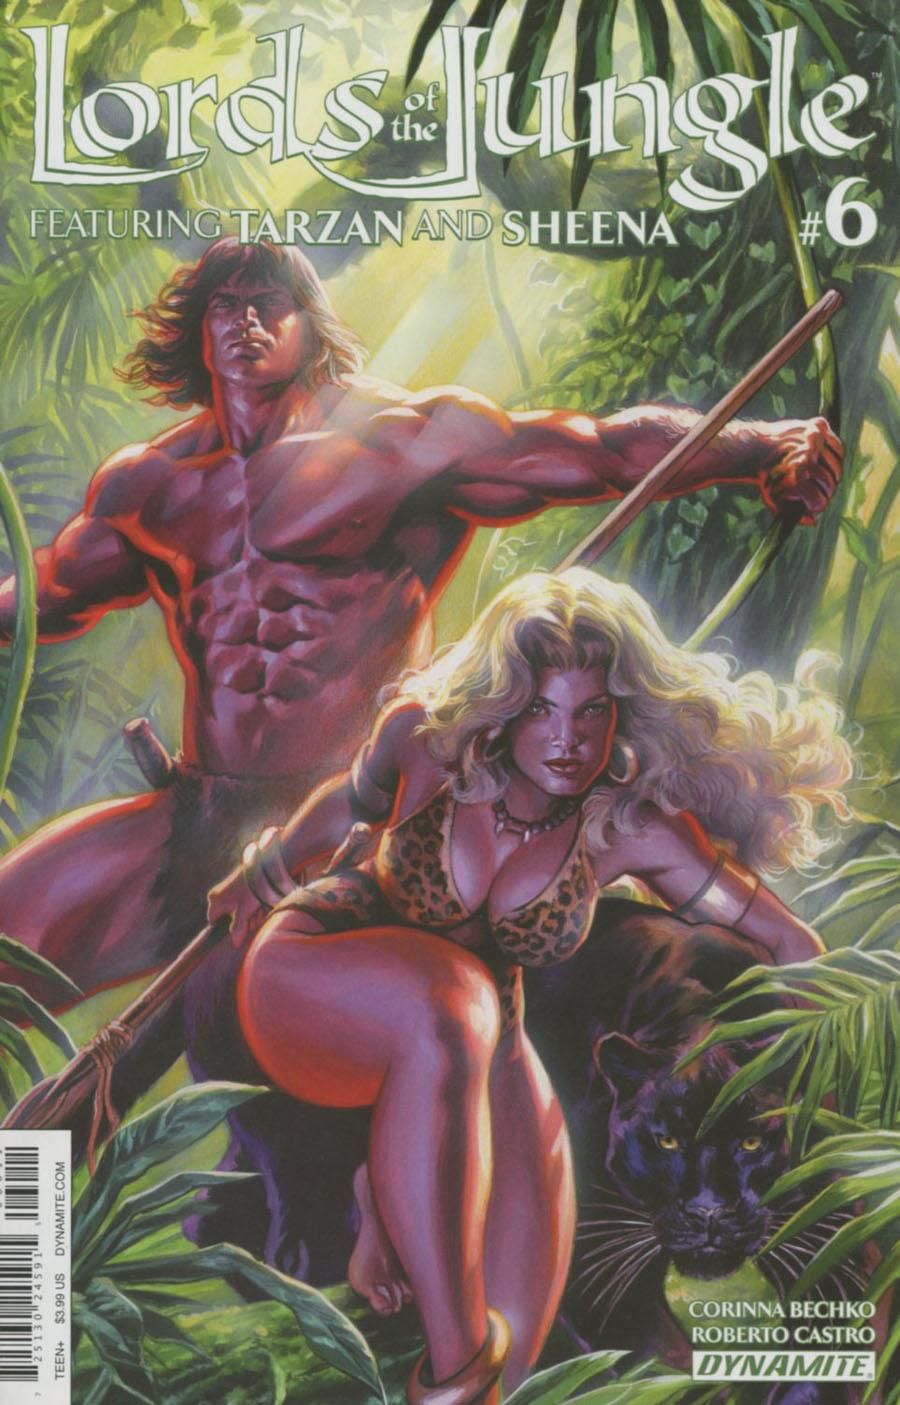 Lords Of The Jungle Vol. 1 #6